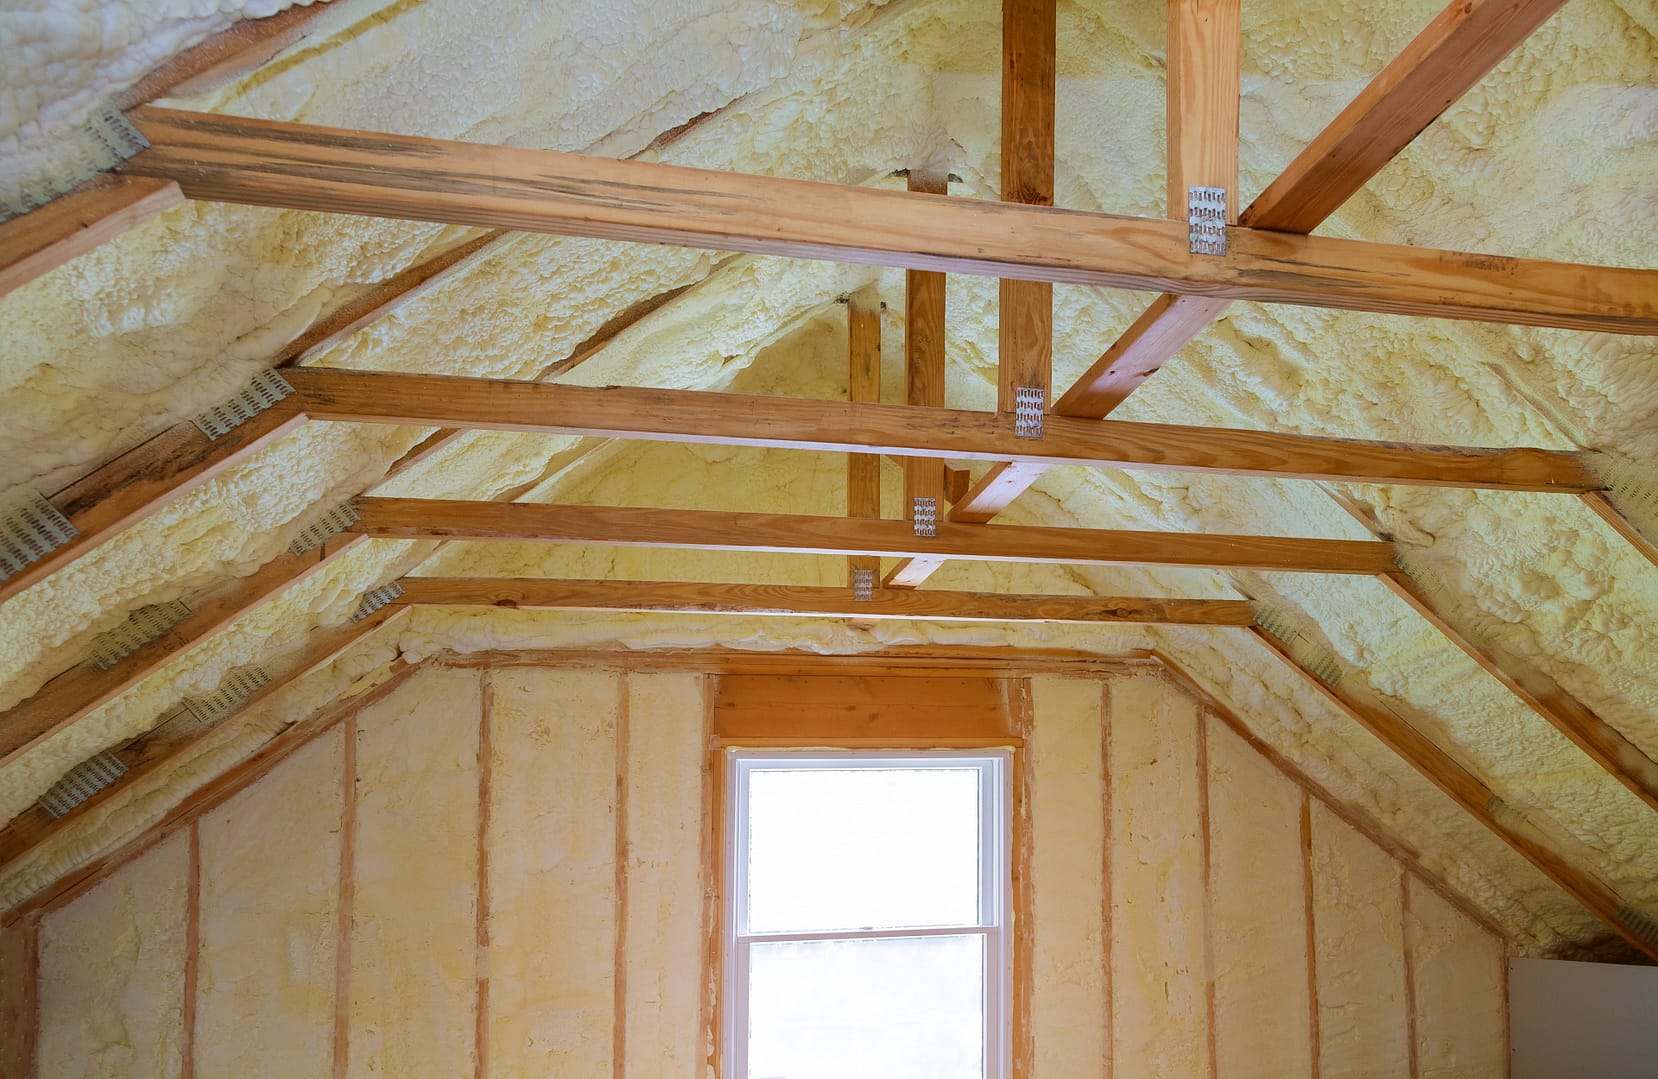 Attic insulation - roofing company baltimore county md - Home Crafters Roofing and Contracting